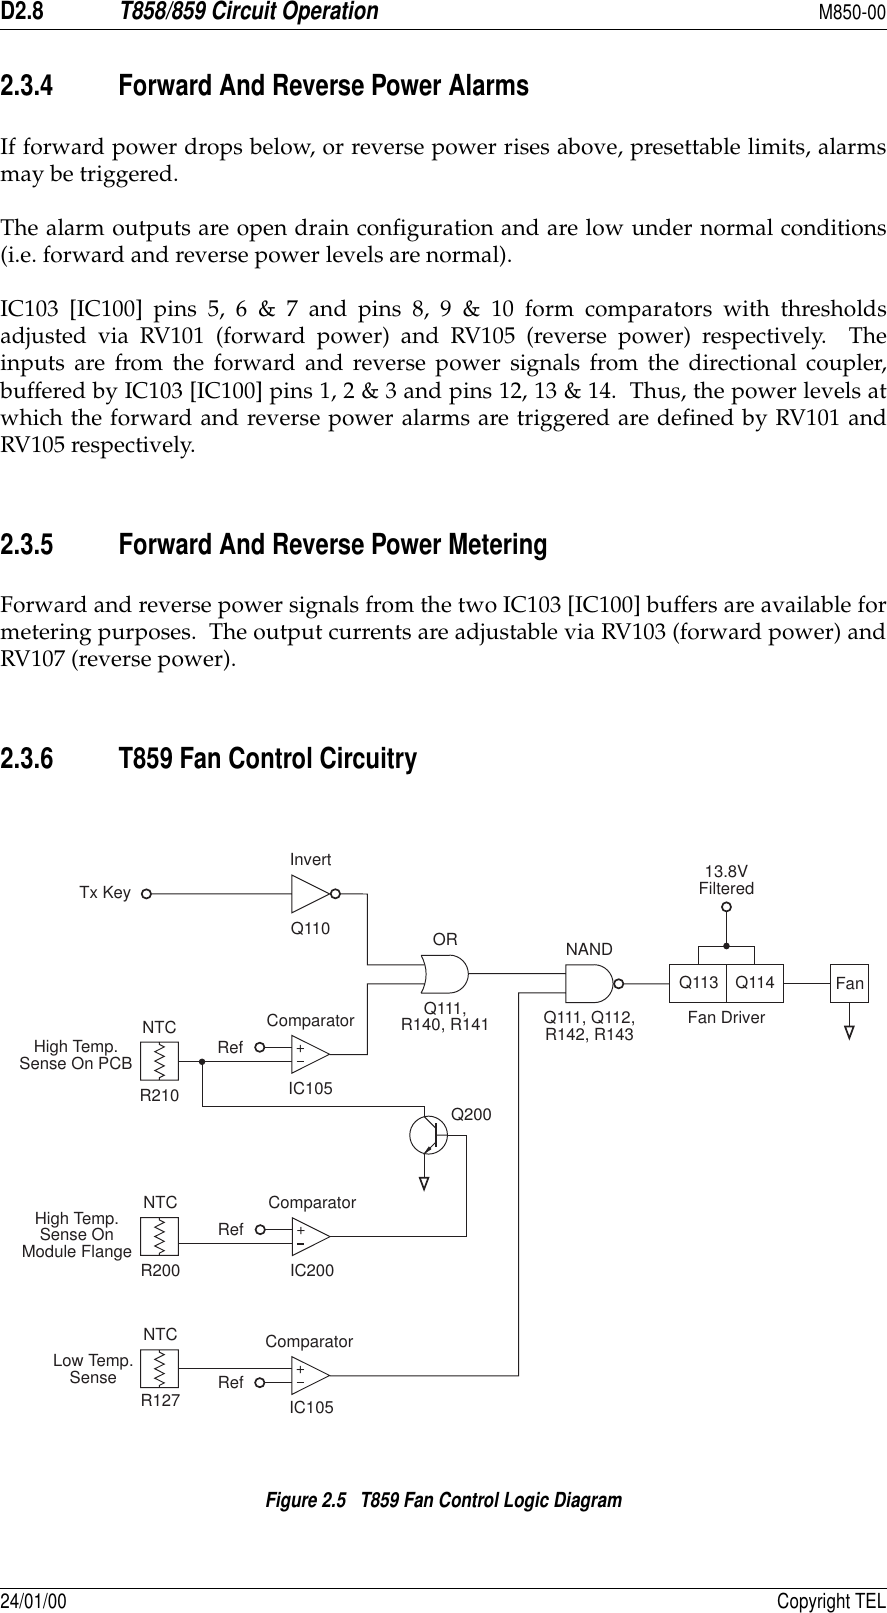 D2.8T858/859 Circuit OperationM850-0024/01/00 Copyright TEL2.3.4 Forward And Reverse Power AlarmsIf forward power drops below, or reverse power rises above, presettable limits, alarmsmay be triggered.The alarm outputs are open drain configuration and are low under normal conditions(i.e. forward and reverse power levels are normal).IC103 [IC100] pins 5, 6 &amp; 7 and pins 8, 9 &amp; 10 form comparators with thresholdsadjusted via RV101 (forward power) and RV105 (reverse power) respectively.  Theinputs are from the forward and reverse power signals from the directional coupler,buffered by IC103 [IC100] pins 1, 2 &amp; 3 and pins 12, 13 &amp; 14.  Thus, the power levels atwhich the forward and reverse power alarms are triggered are defined by RV101 andRV105 respectively.2.3.5 Forward And Reverse Power MeteringForward and reverse power signals from the two IC103 [IC100] buffers are available formetering purposes.  The output currents are adjustable via RV103 (forward power) andRV107 (reverse power).2.3.6 T859 Fan Control CircuitryFigure 2.5   T859 Fan Control Logic DiagramQ113 Q114 FanRef +High Temp.Sense On PCBComparatorIC105R210High Temp.Sense OnModule FlangeLow Temp.SenseNTCTx KeyInvertQ110 ORQ111,R140, R141Q200NANDQ111, Q112,R142, R143 Fan Driver13.8VFilteredRef +ComparatorIC200R200NTCComparatorRef +IC105R127NTC